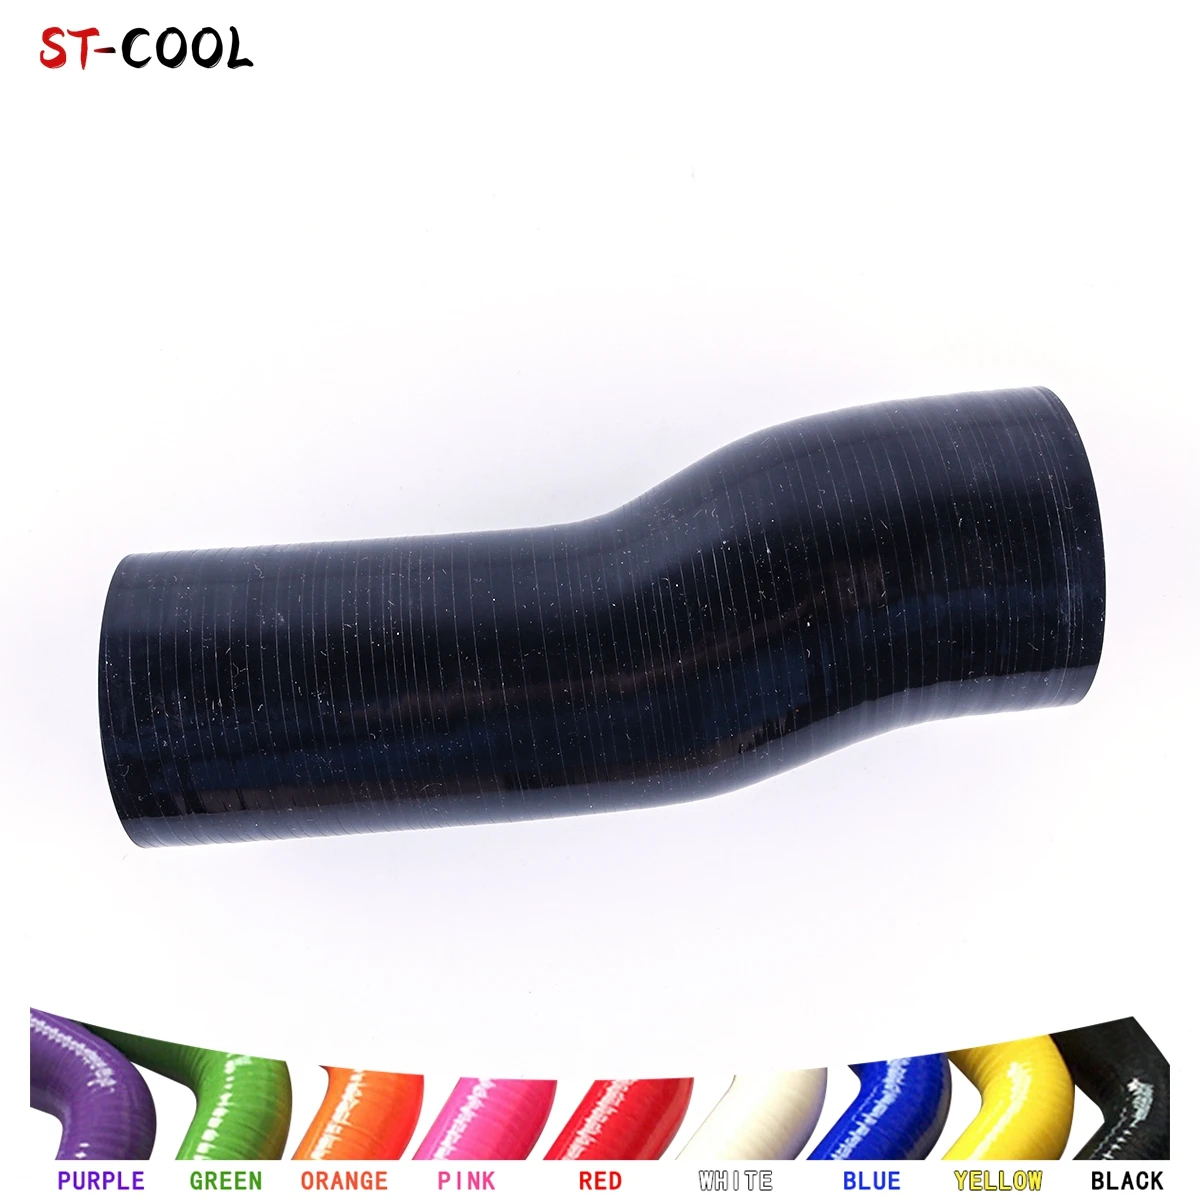 

For Honda Civic 2016-2019 Civic Si 2017-2018 1.5L Turbo Air Intake Silicone Hose Piping Tube 4-Ply 1Pc 10 Colors